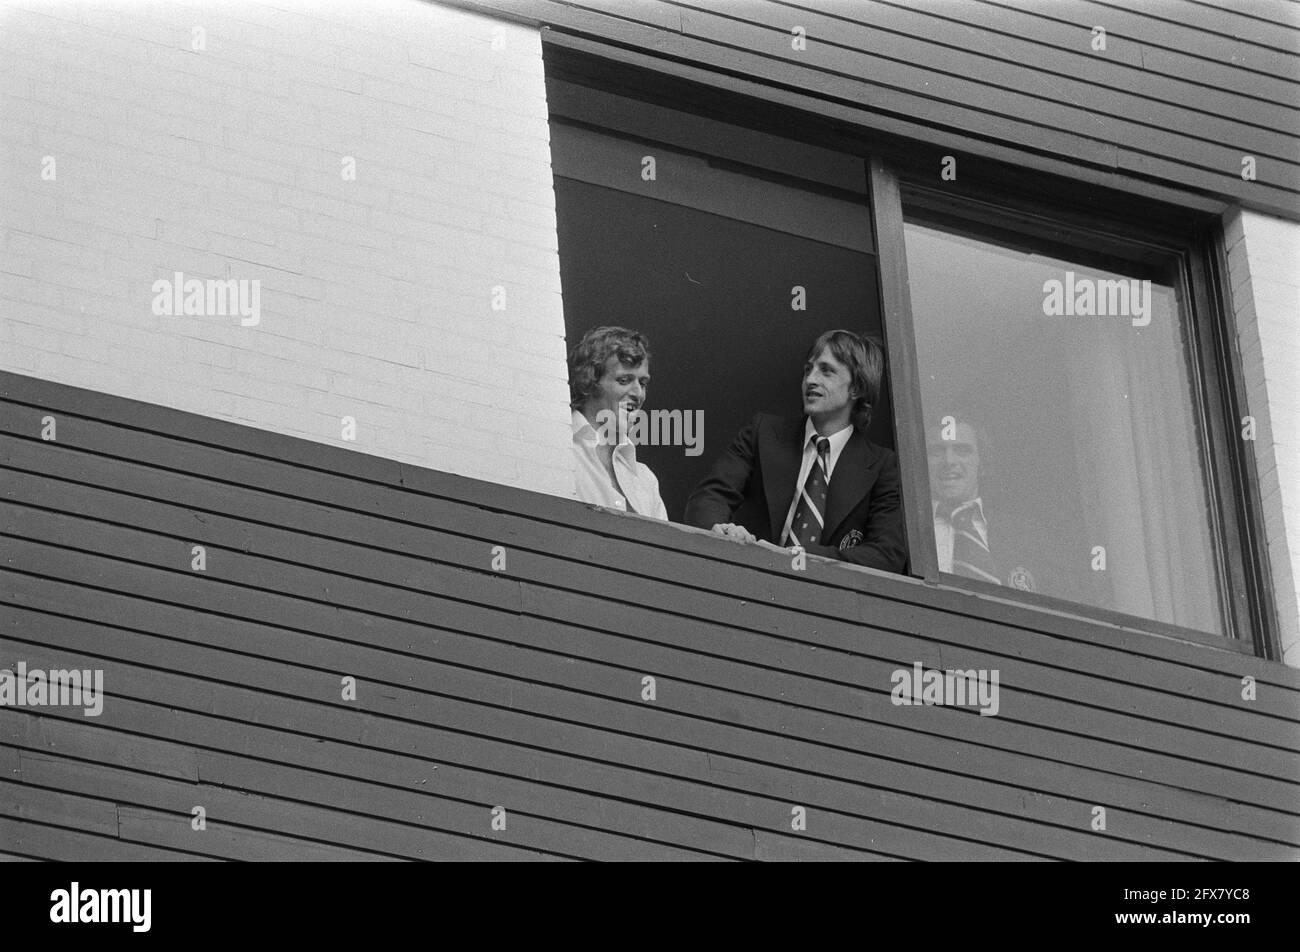 Arrival Dutch national team in Hiltrup ( West Germany ) World Cup 1974; Piet Keizer (left), Johan Cruijff and Pleun Strik look out of window, June 12, 1974, sports, soccer, soccer players, The Netherlands, 20th century press agency photo, news to remember, documentary, historic photography 1945-1990, visual stories, human history of the Twentieth Century, capturing moments in time Stock Photo